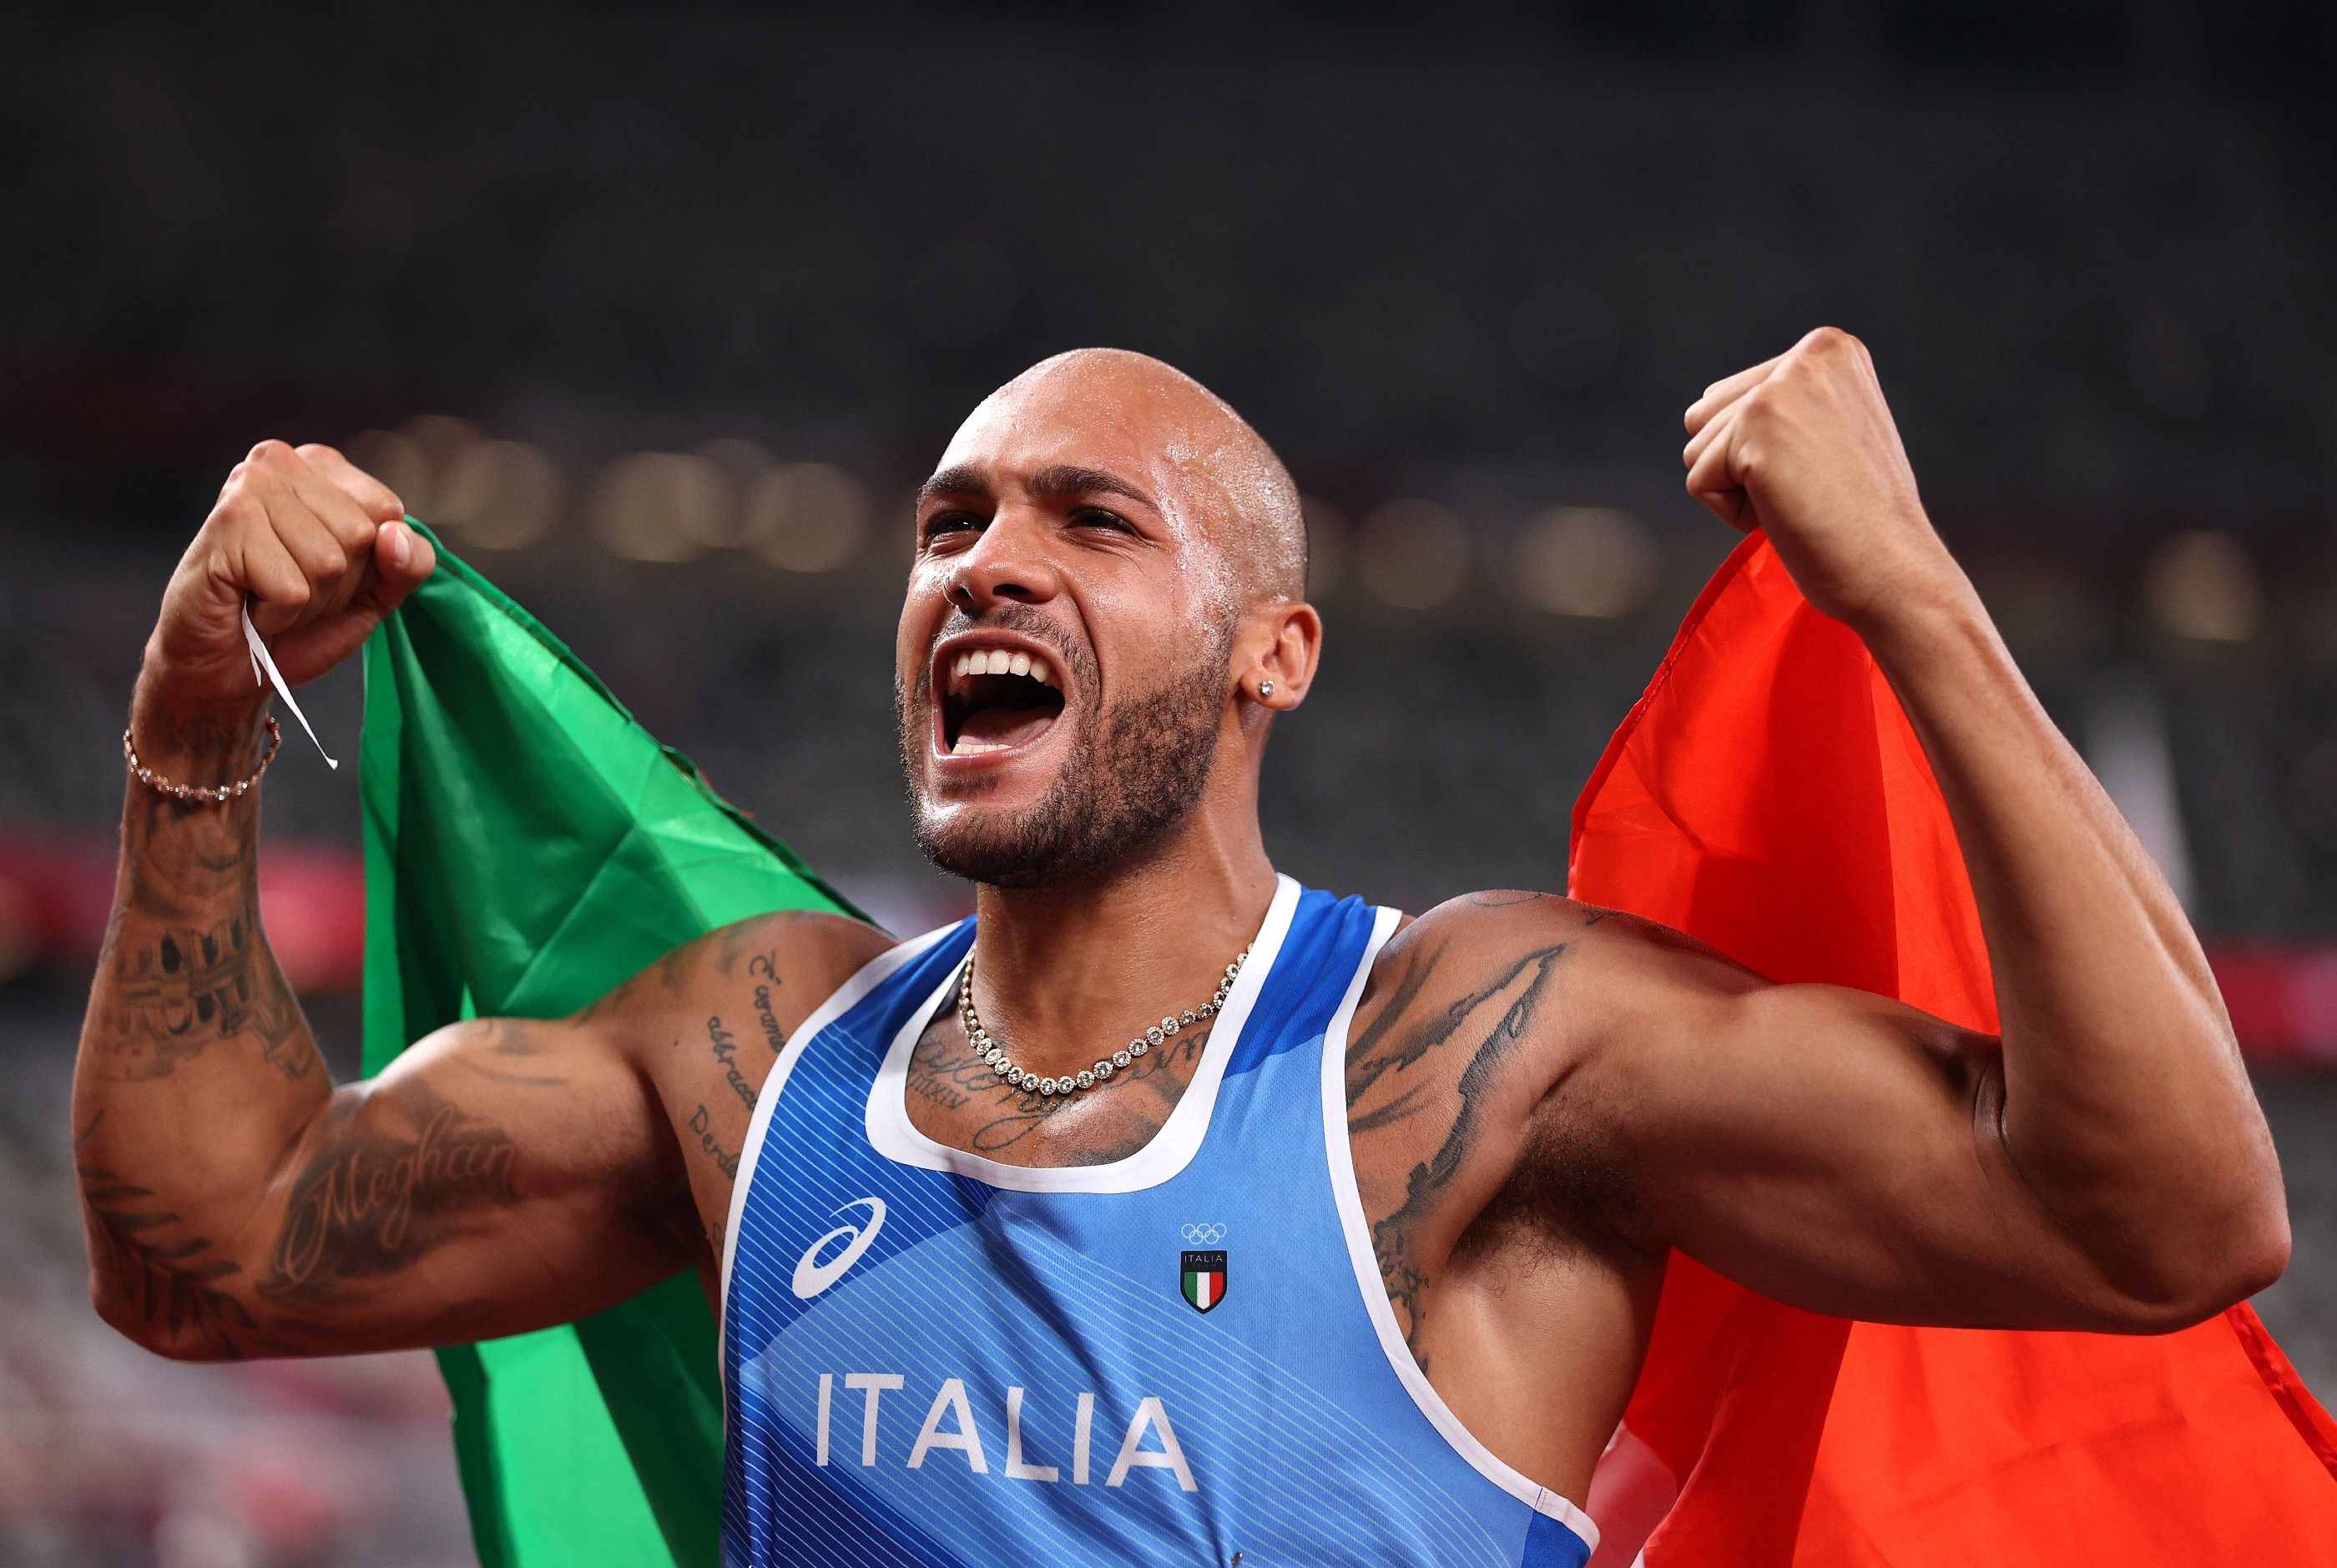 Lamont Marcell Jacobs celebrates his 100m gold at the Tokyo 2020 Olympic Games